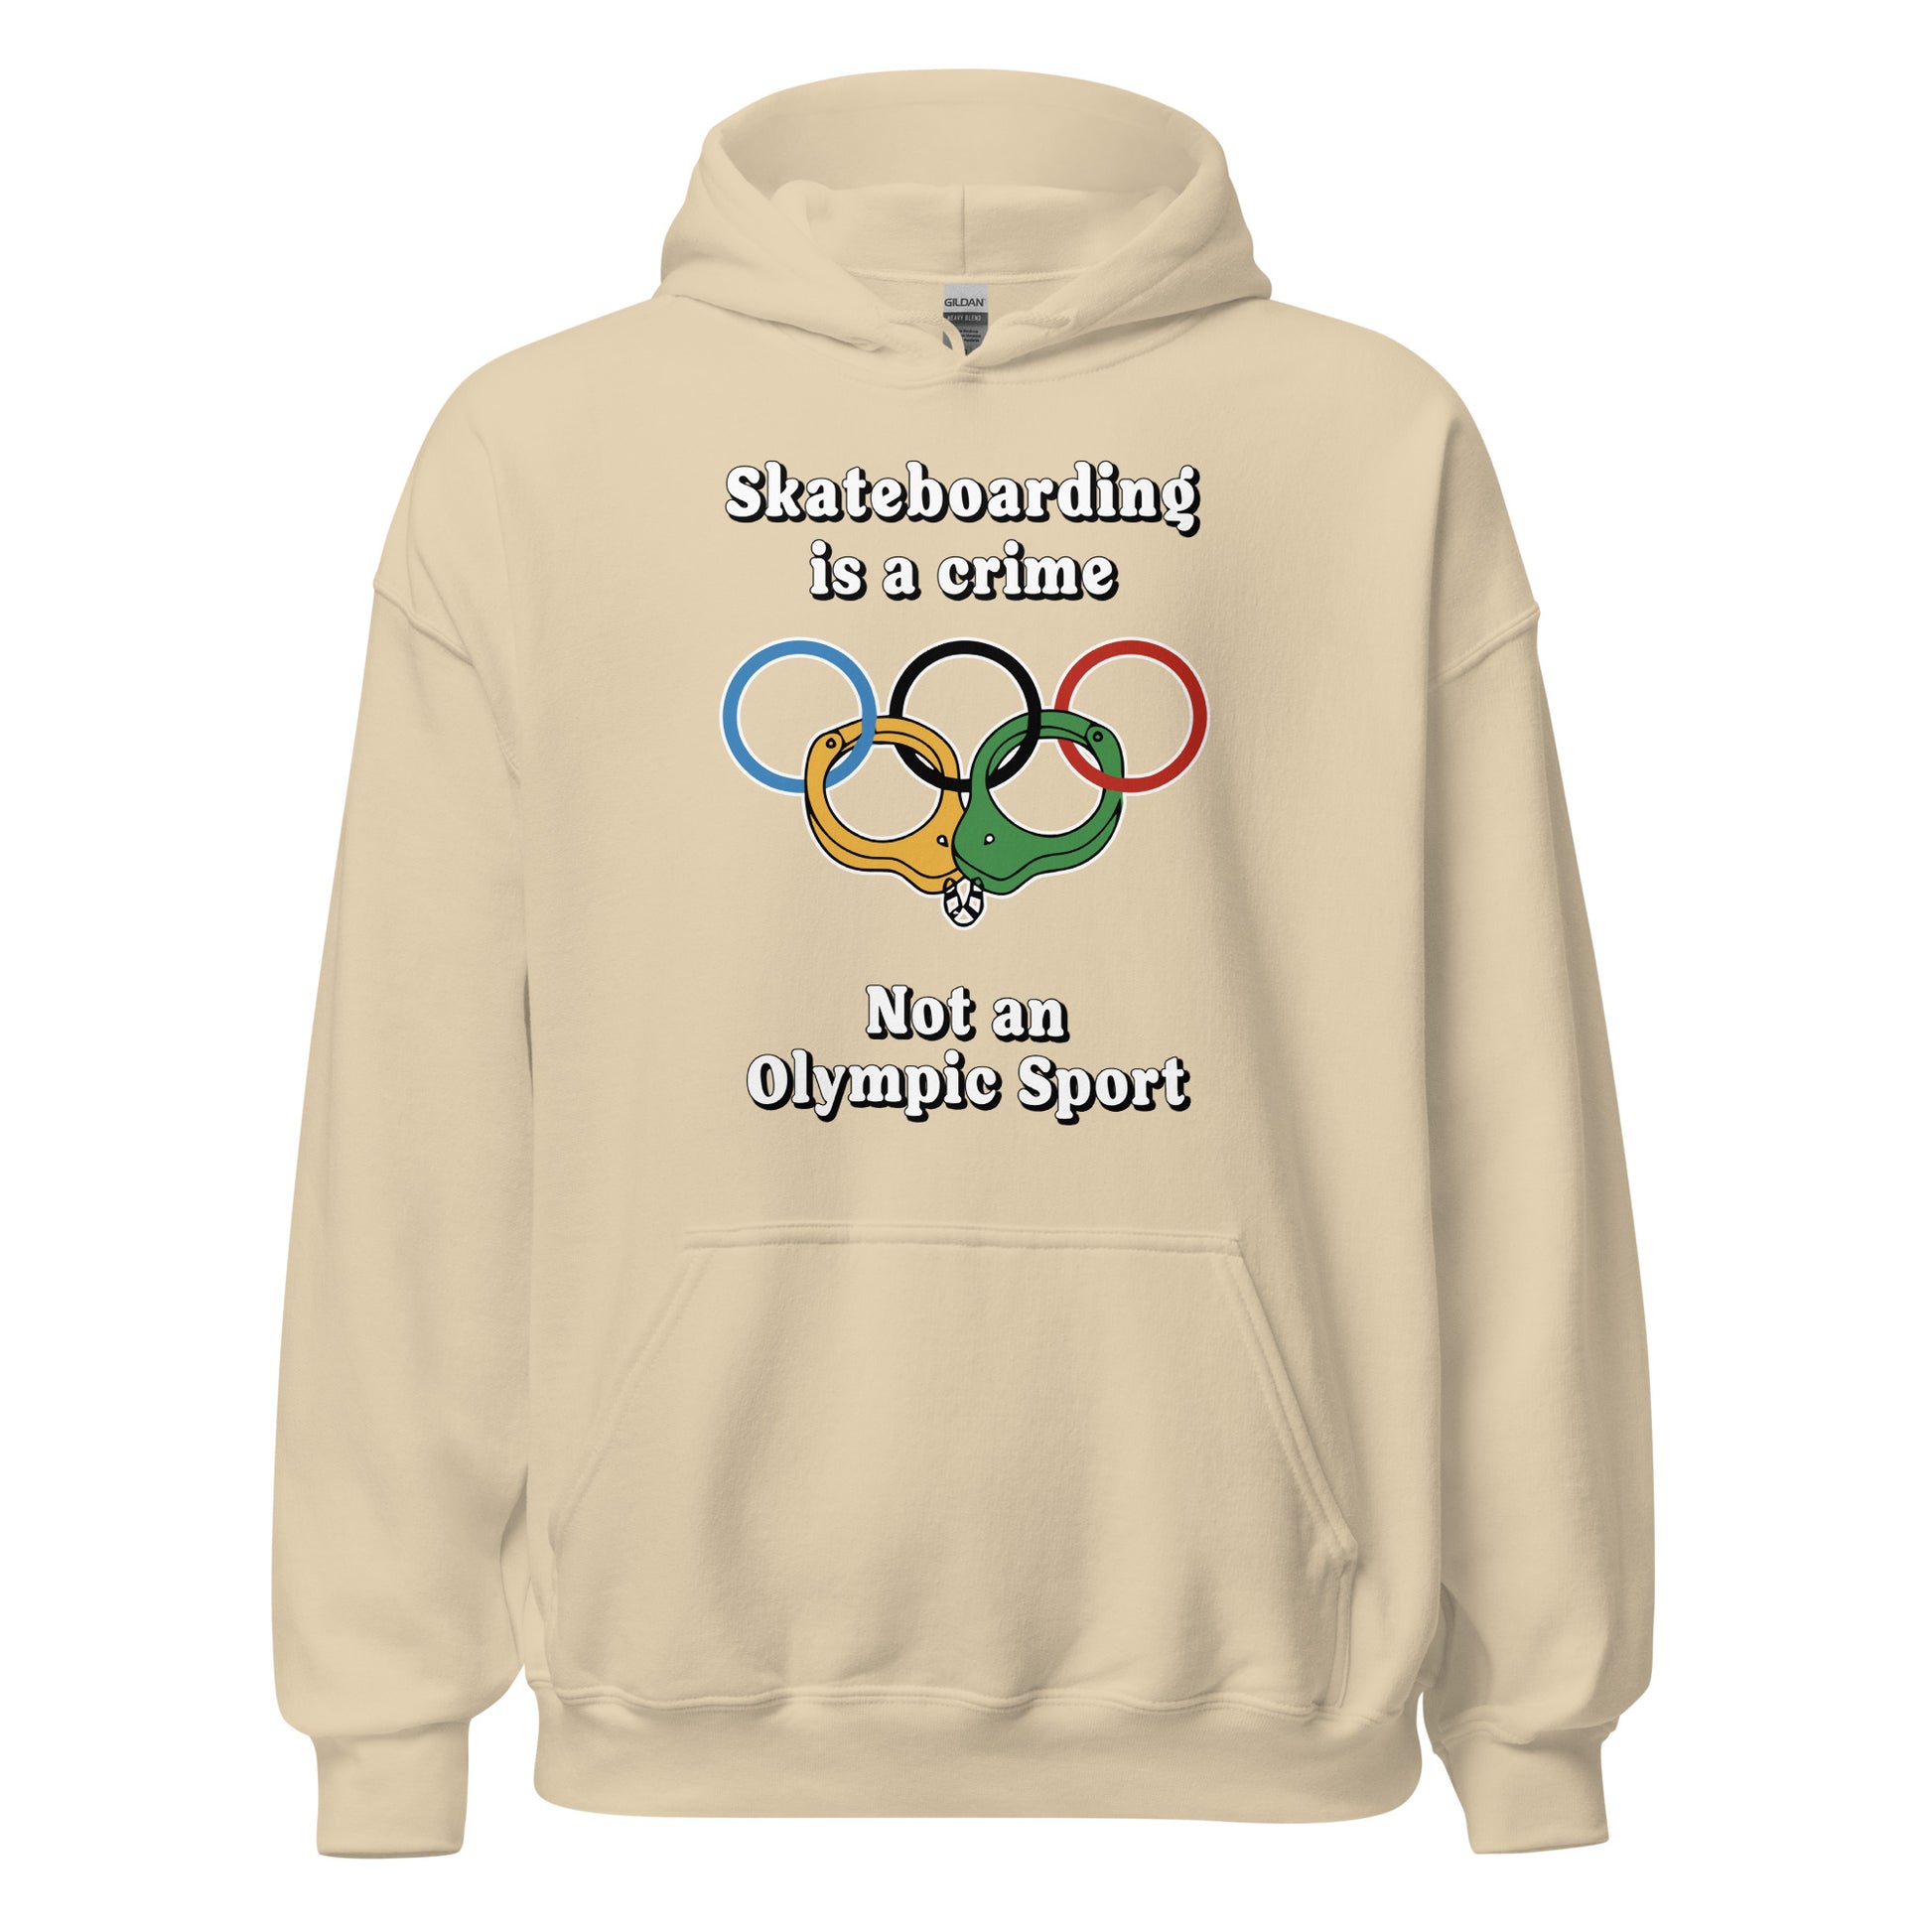 Skateboarding is a crime not an olympic sport design printed on a hoodie by Whistler Shirts